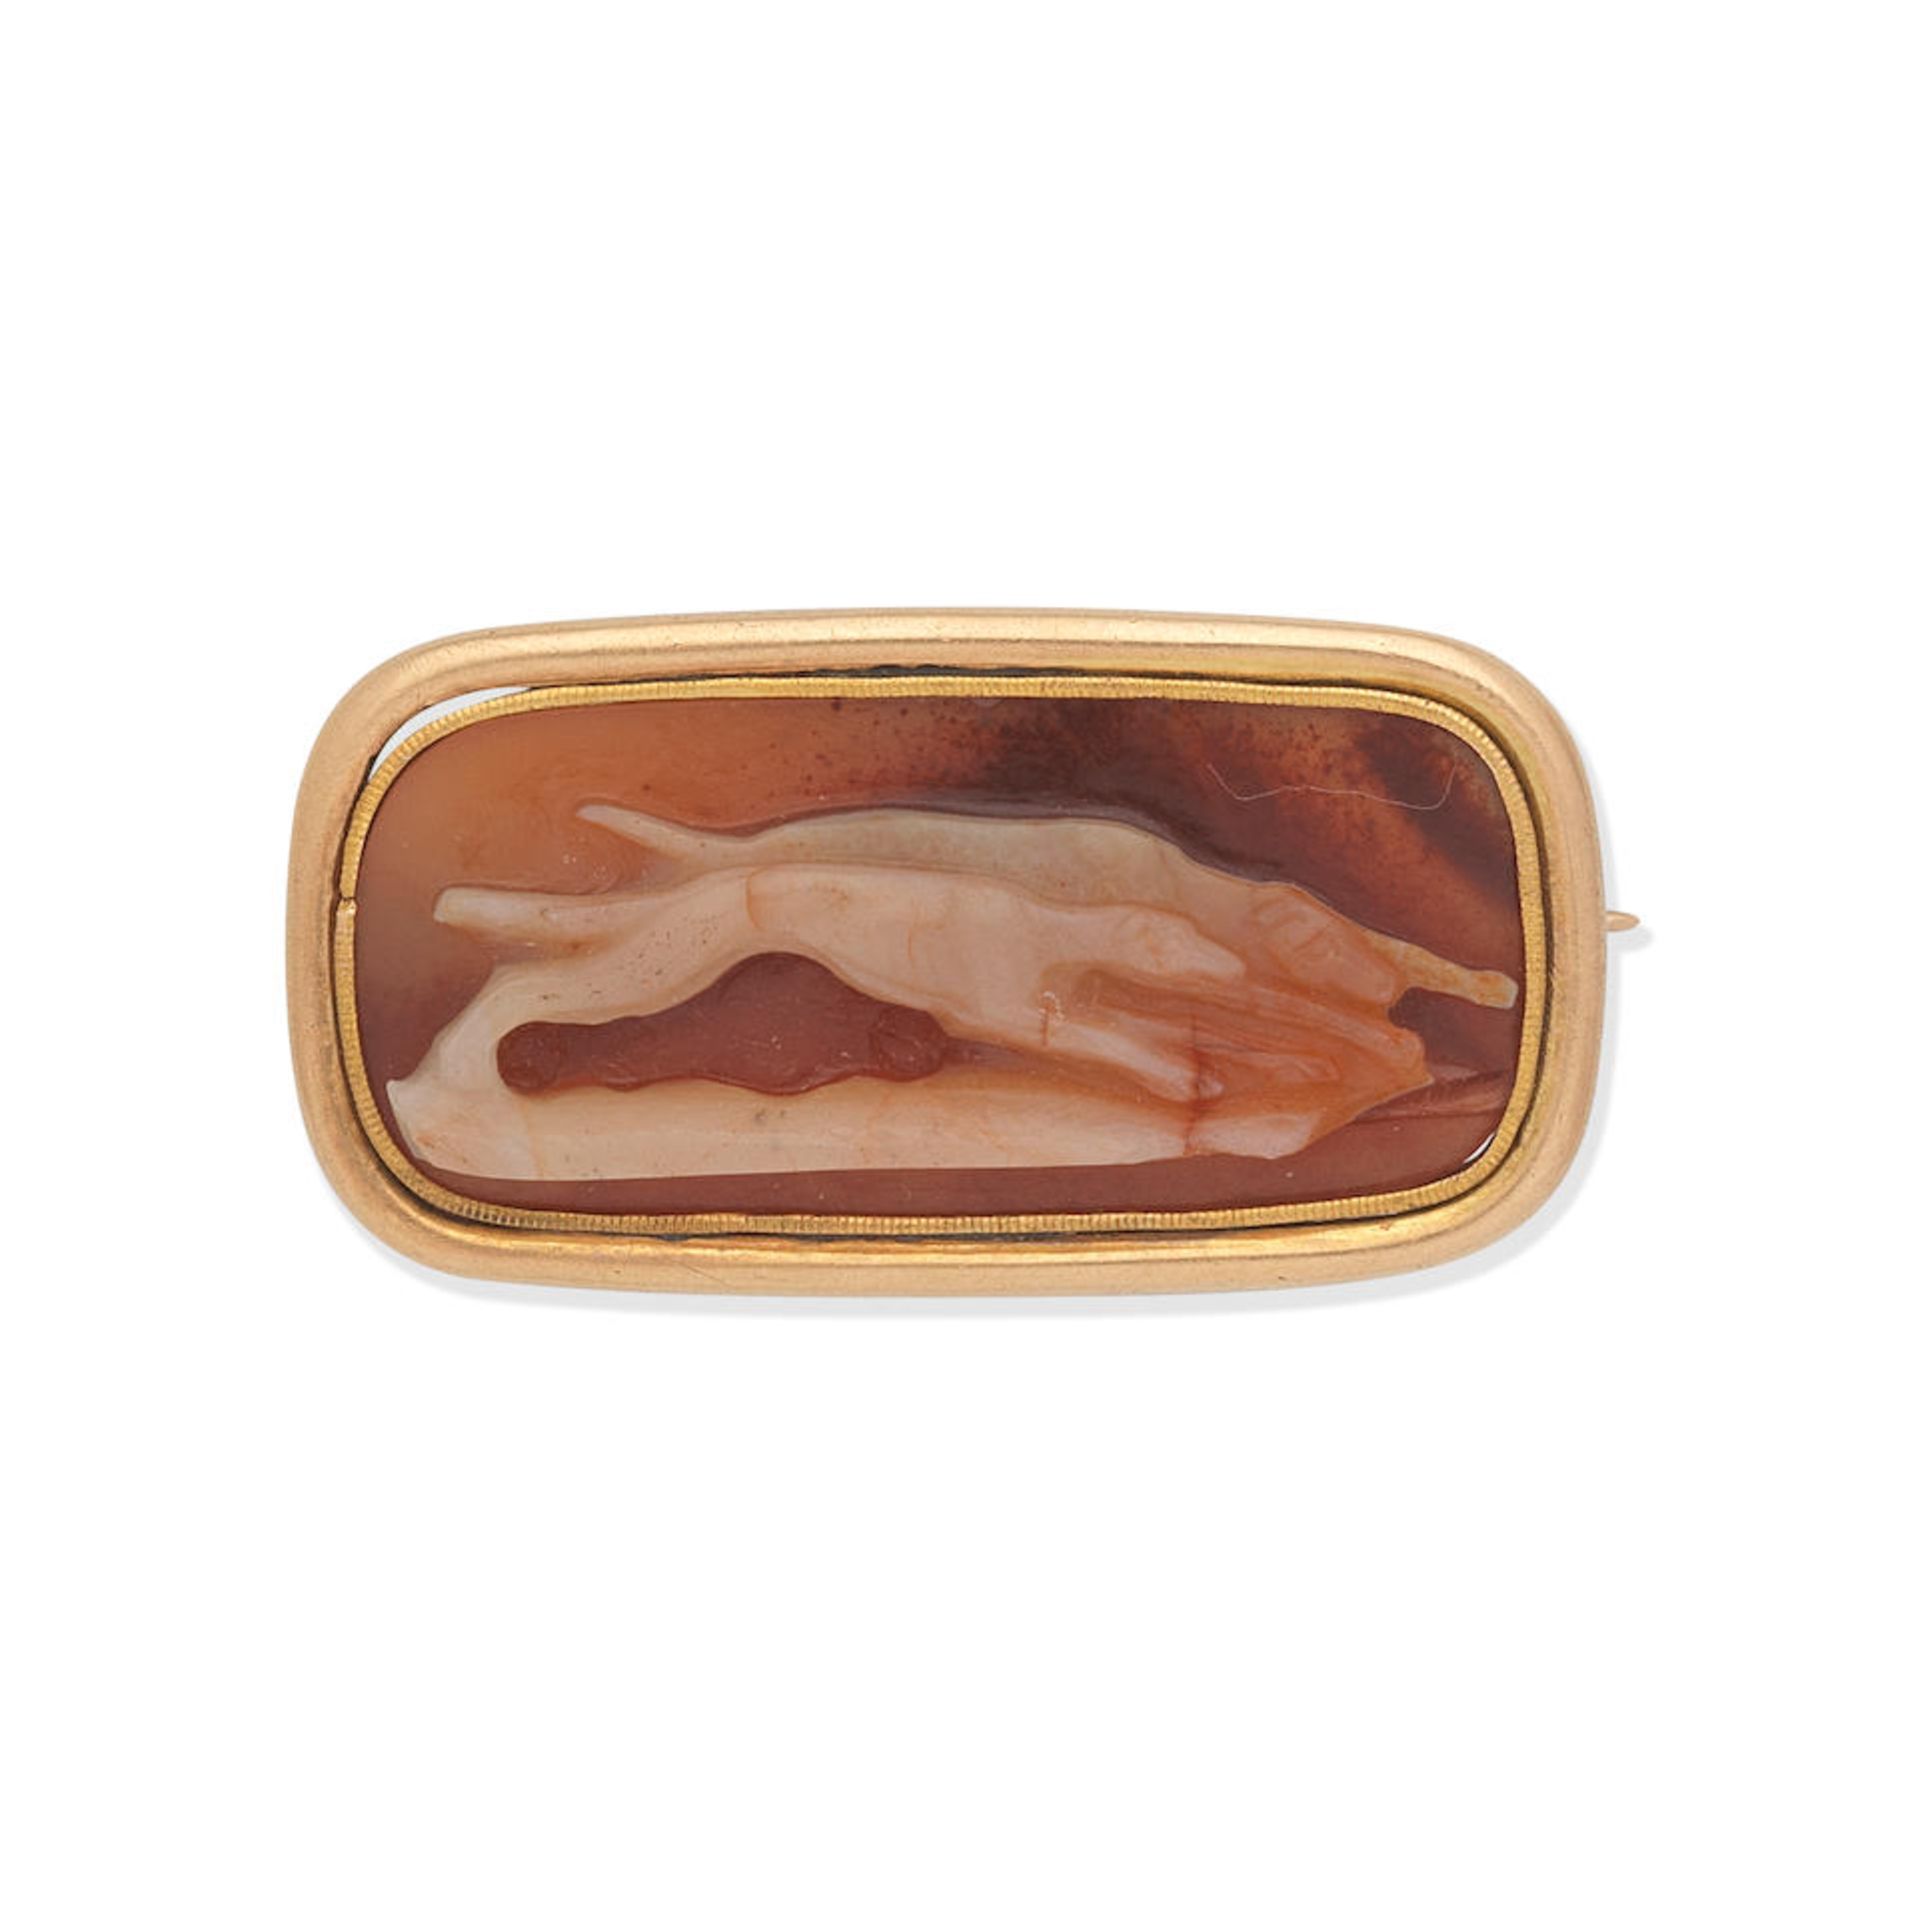 AGATE CAMEO BROOCH,